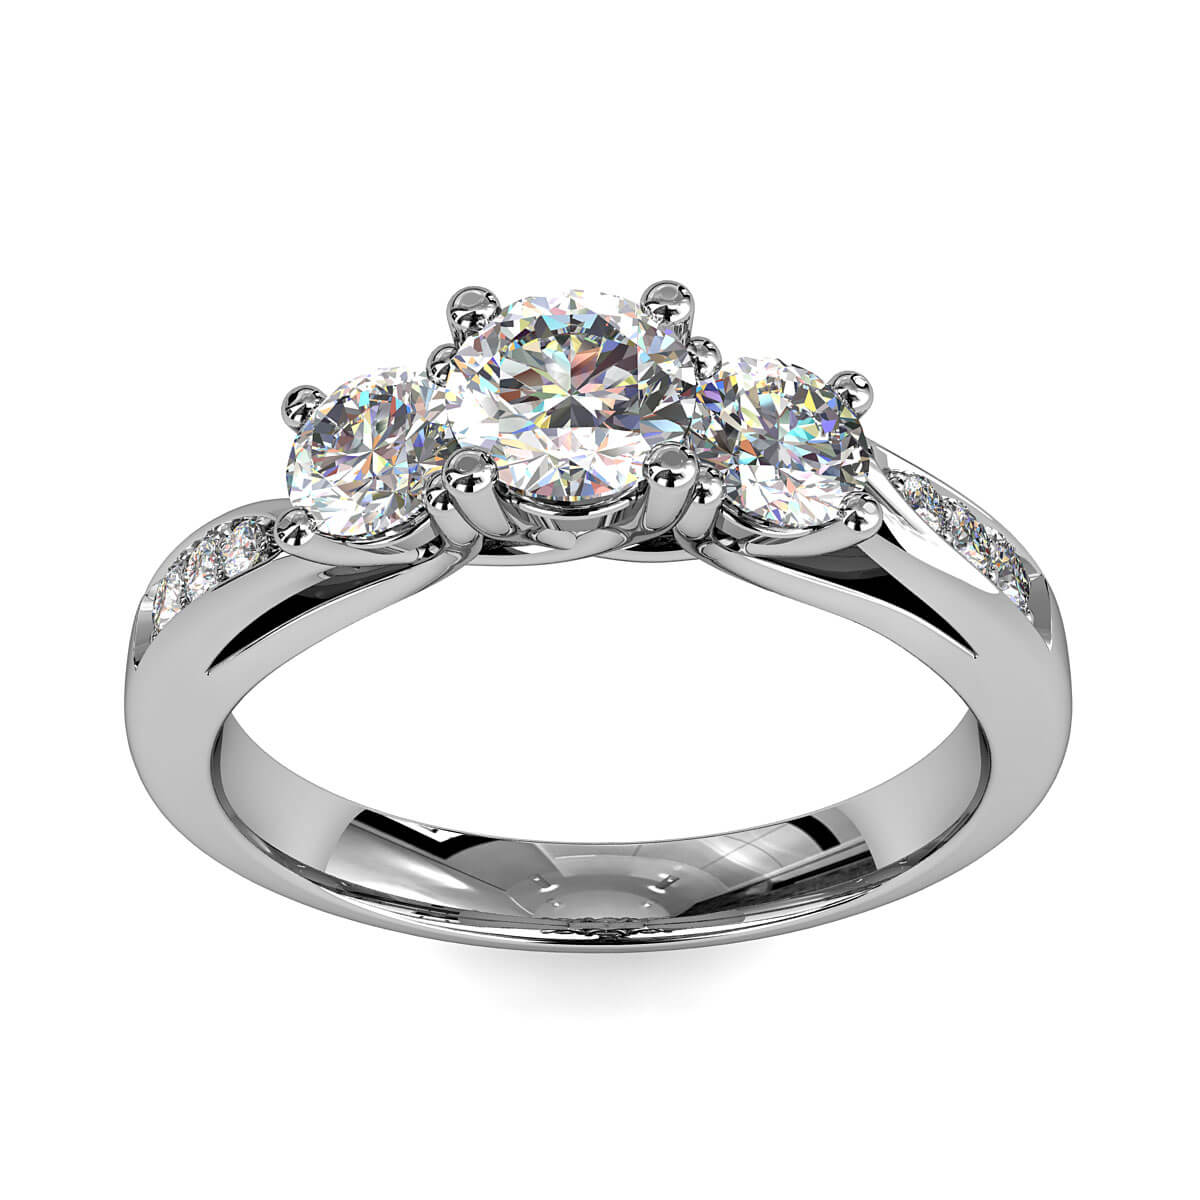 Round Brilliant Cut Diamond Trilogy Engagement Ring, Stones 4 Claw Set on a Curved Bead Set Band with Undersweep Setting.